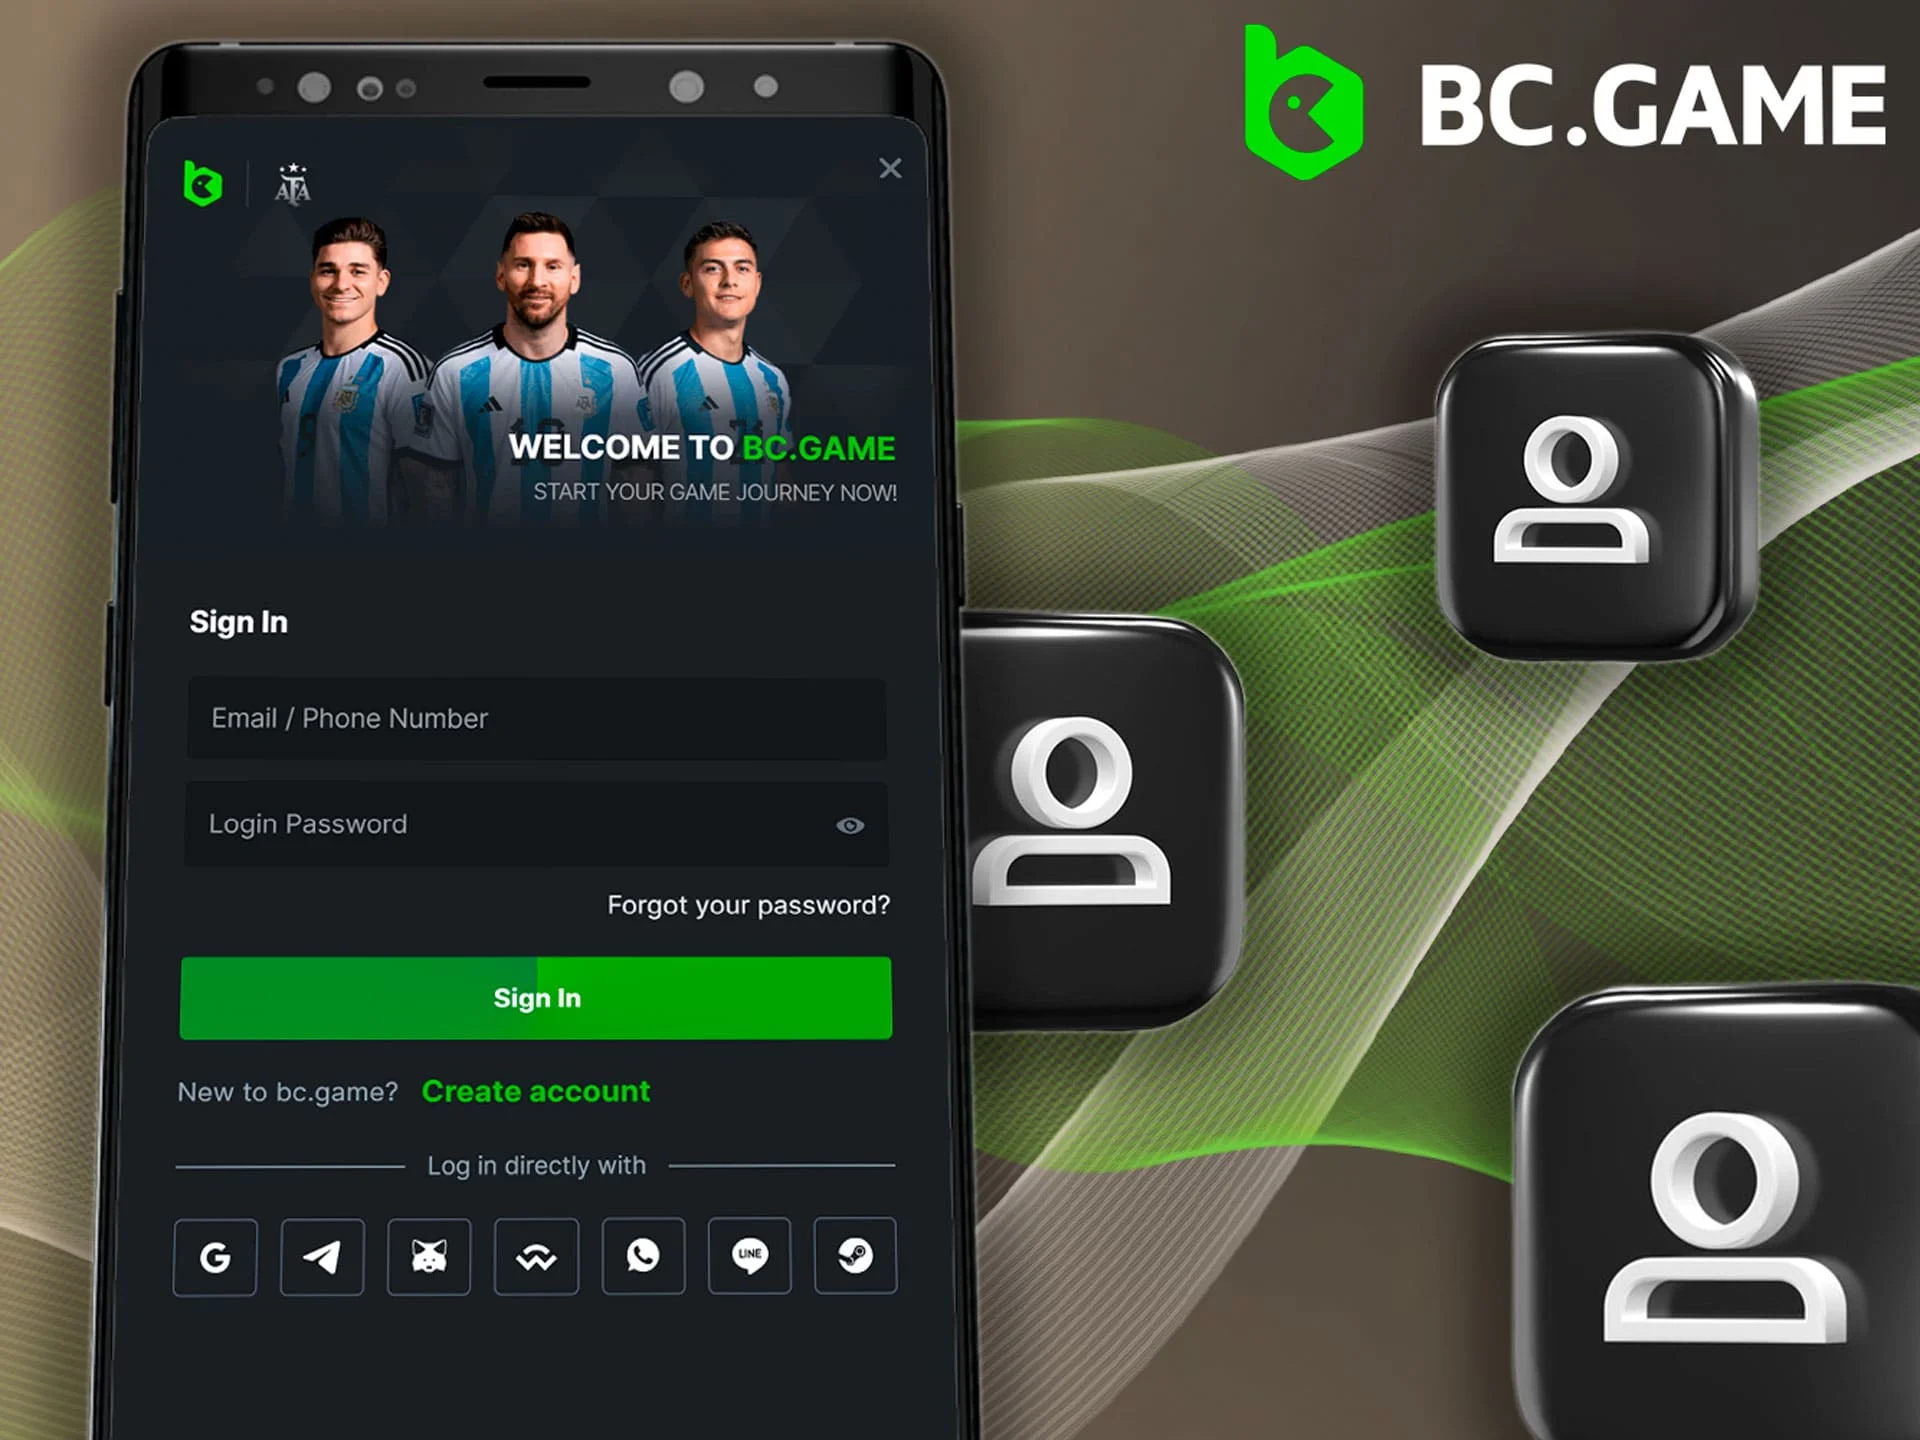 Open the BC Game mobile app and fill in the required fields to log in. After logging into the app, we can use the full functionality of the BC.Game Casino platform from your smartphone.